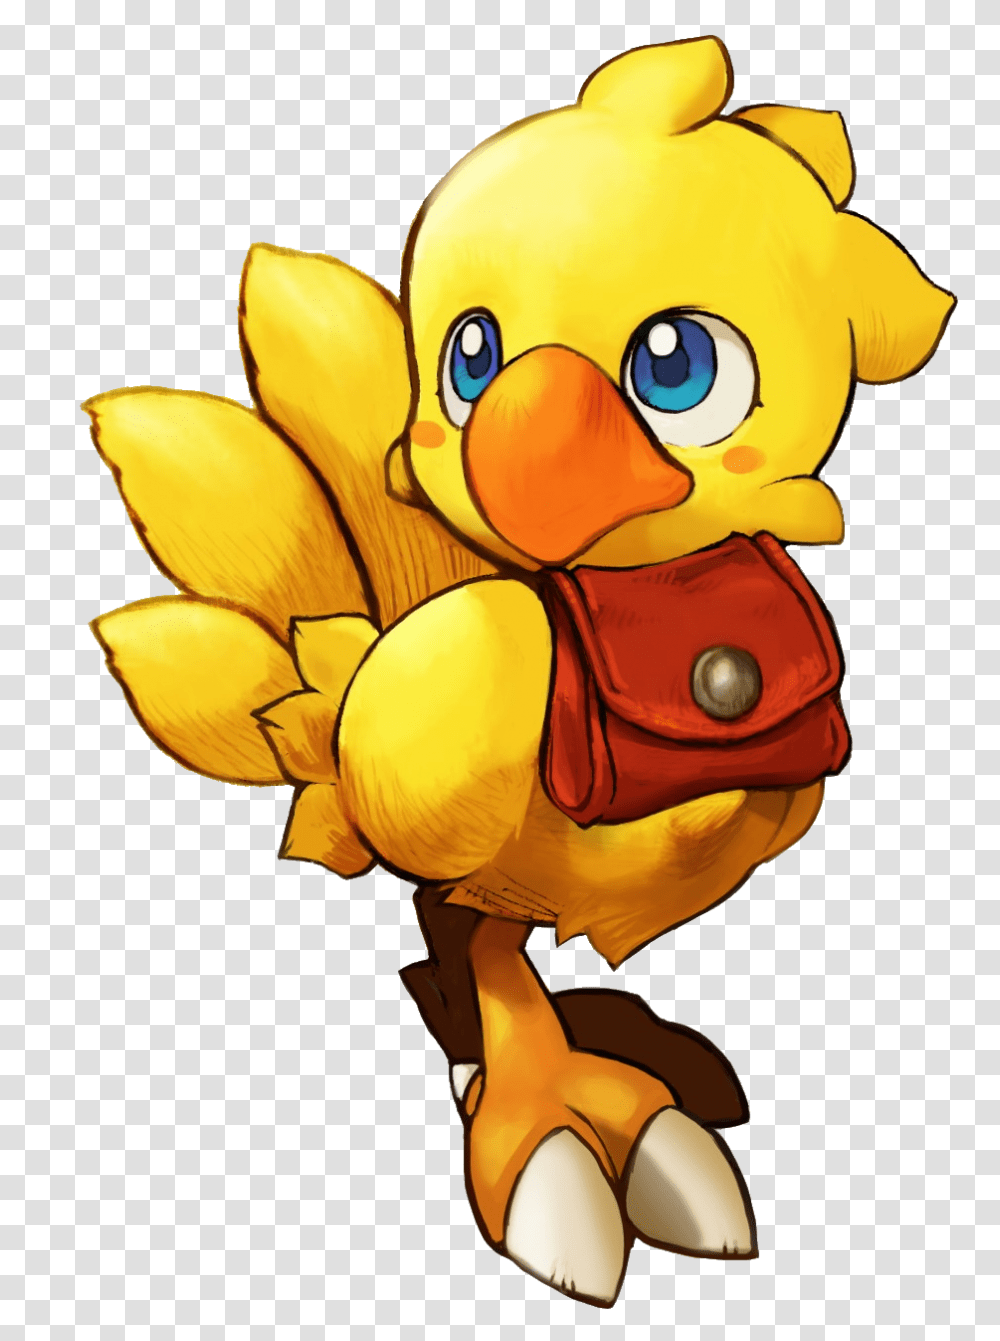 Popular And Trending Chocobo Stickers, Toy, Bird, Animal, Angry Birds Transparent Png